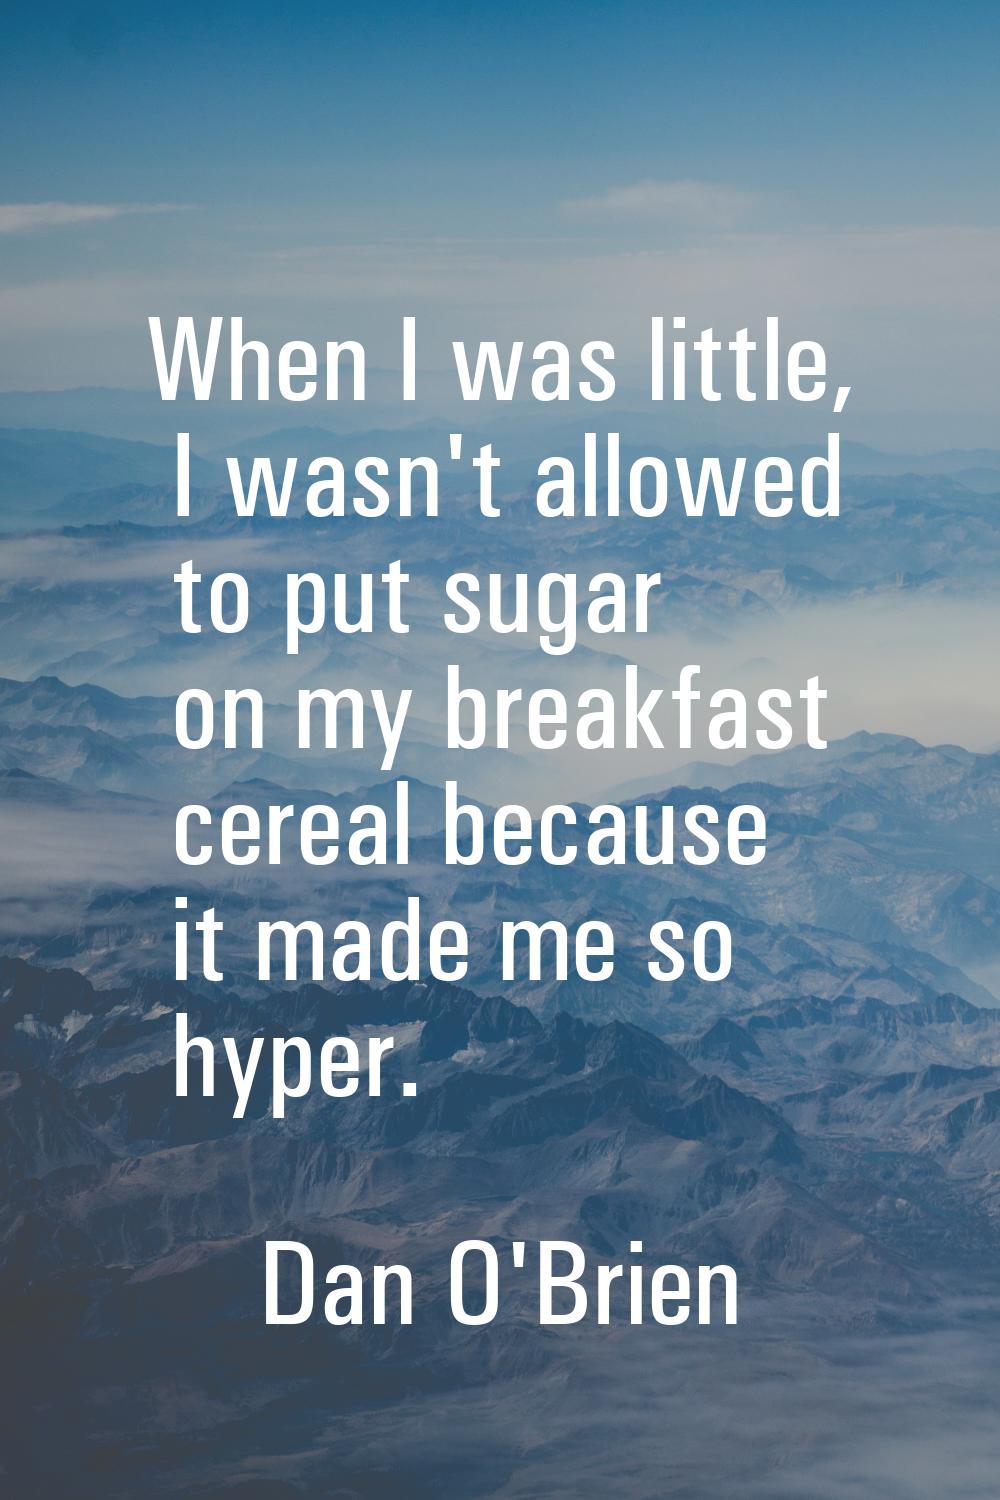 When I was little, I wasn't allowed to put sugar on my breakfast cereal because it made me so hyper